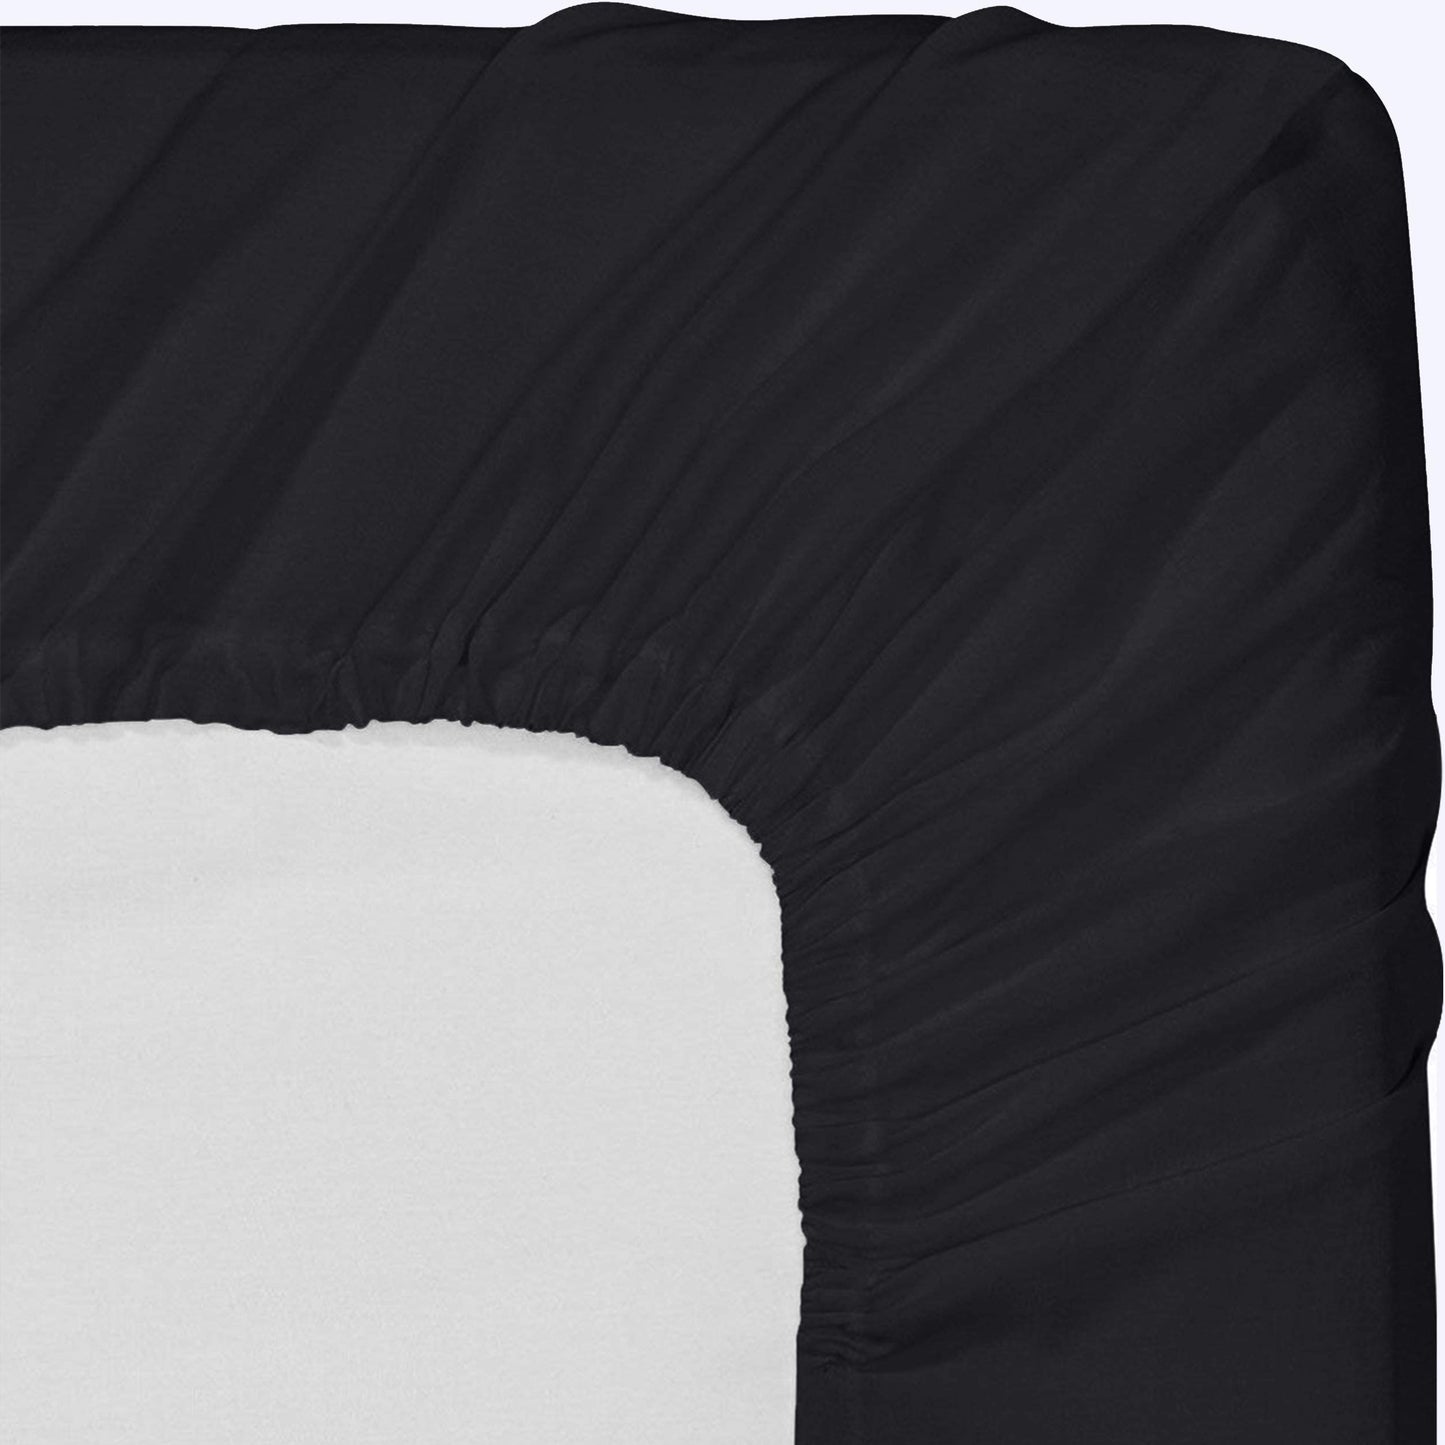 Utopia Bedding Twin Fitted Sheets - Bulk Pack of 6 Bottom Sheets - Soft Brushed Microfiber - Deep Pockets - Shrinkage & Fade Resistant - Easy Care (Black)